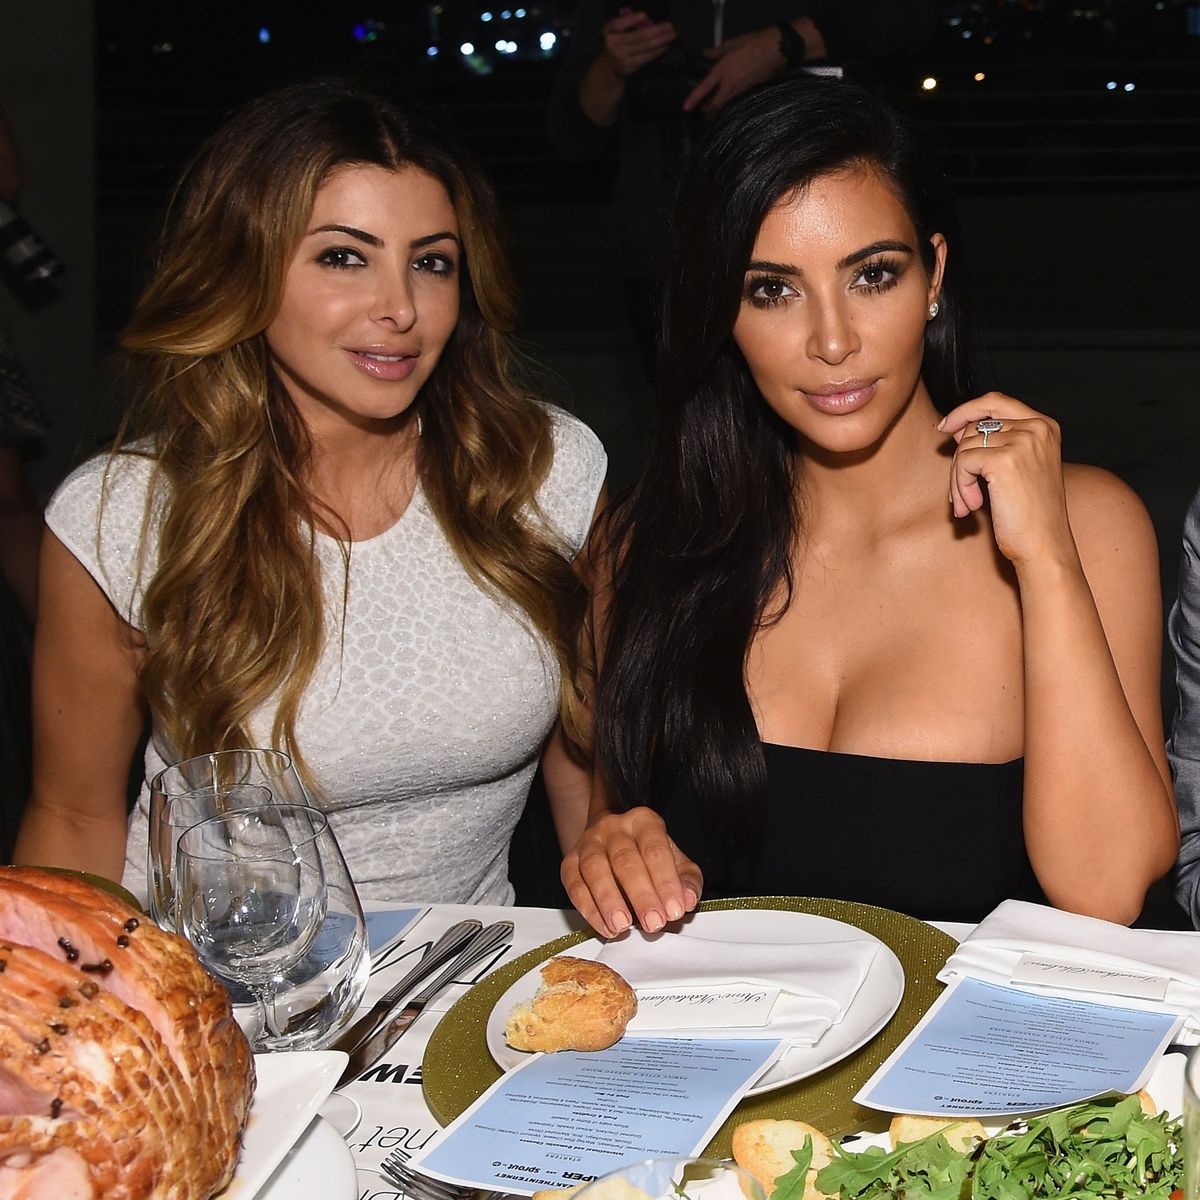 Why Does Larsa Pippen Have Drama With Kardashians?